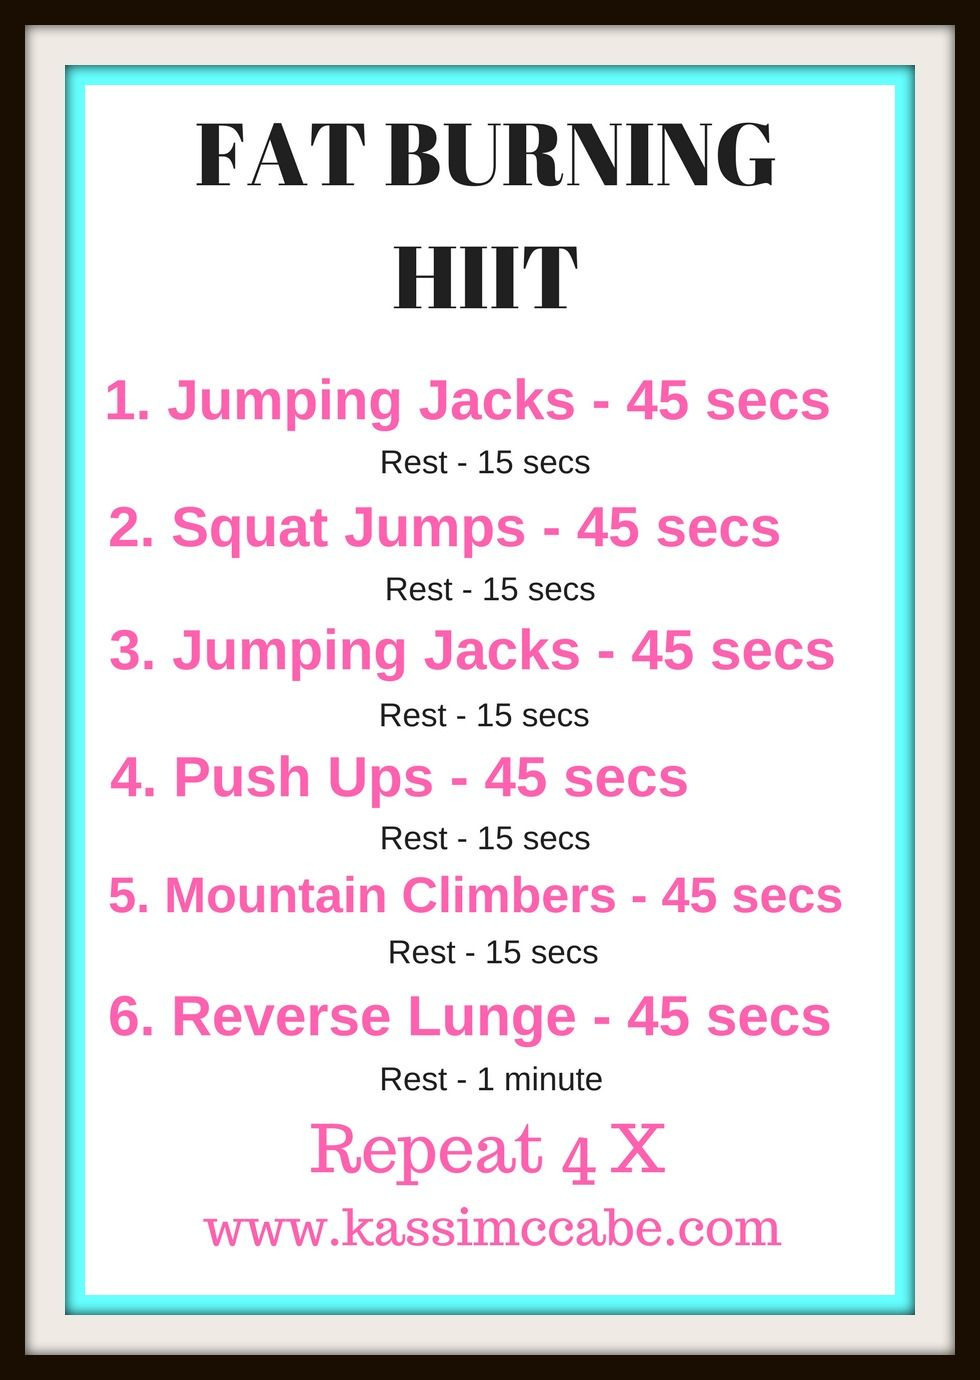 Simple Fat Burning Workouts
 Fat Burning High Intensity Training This is a great